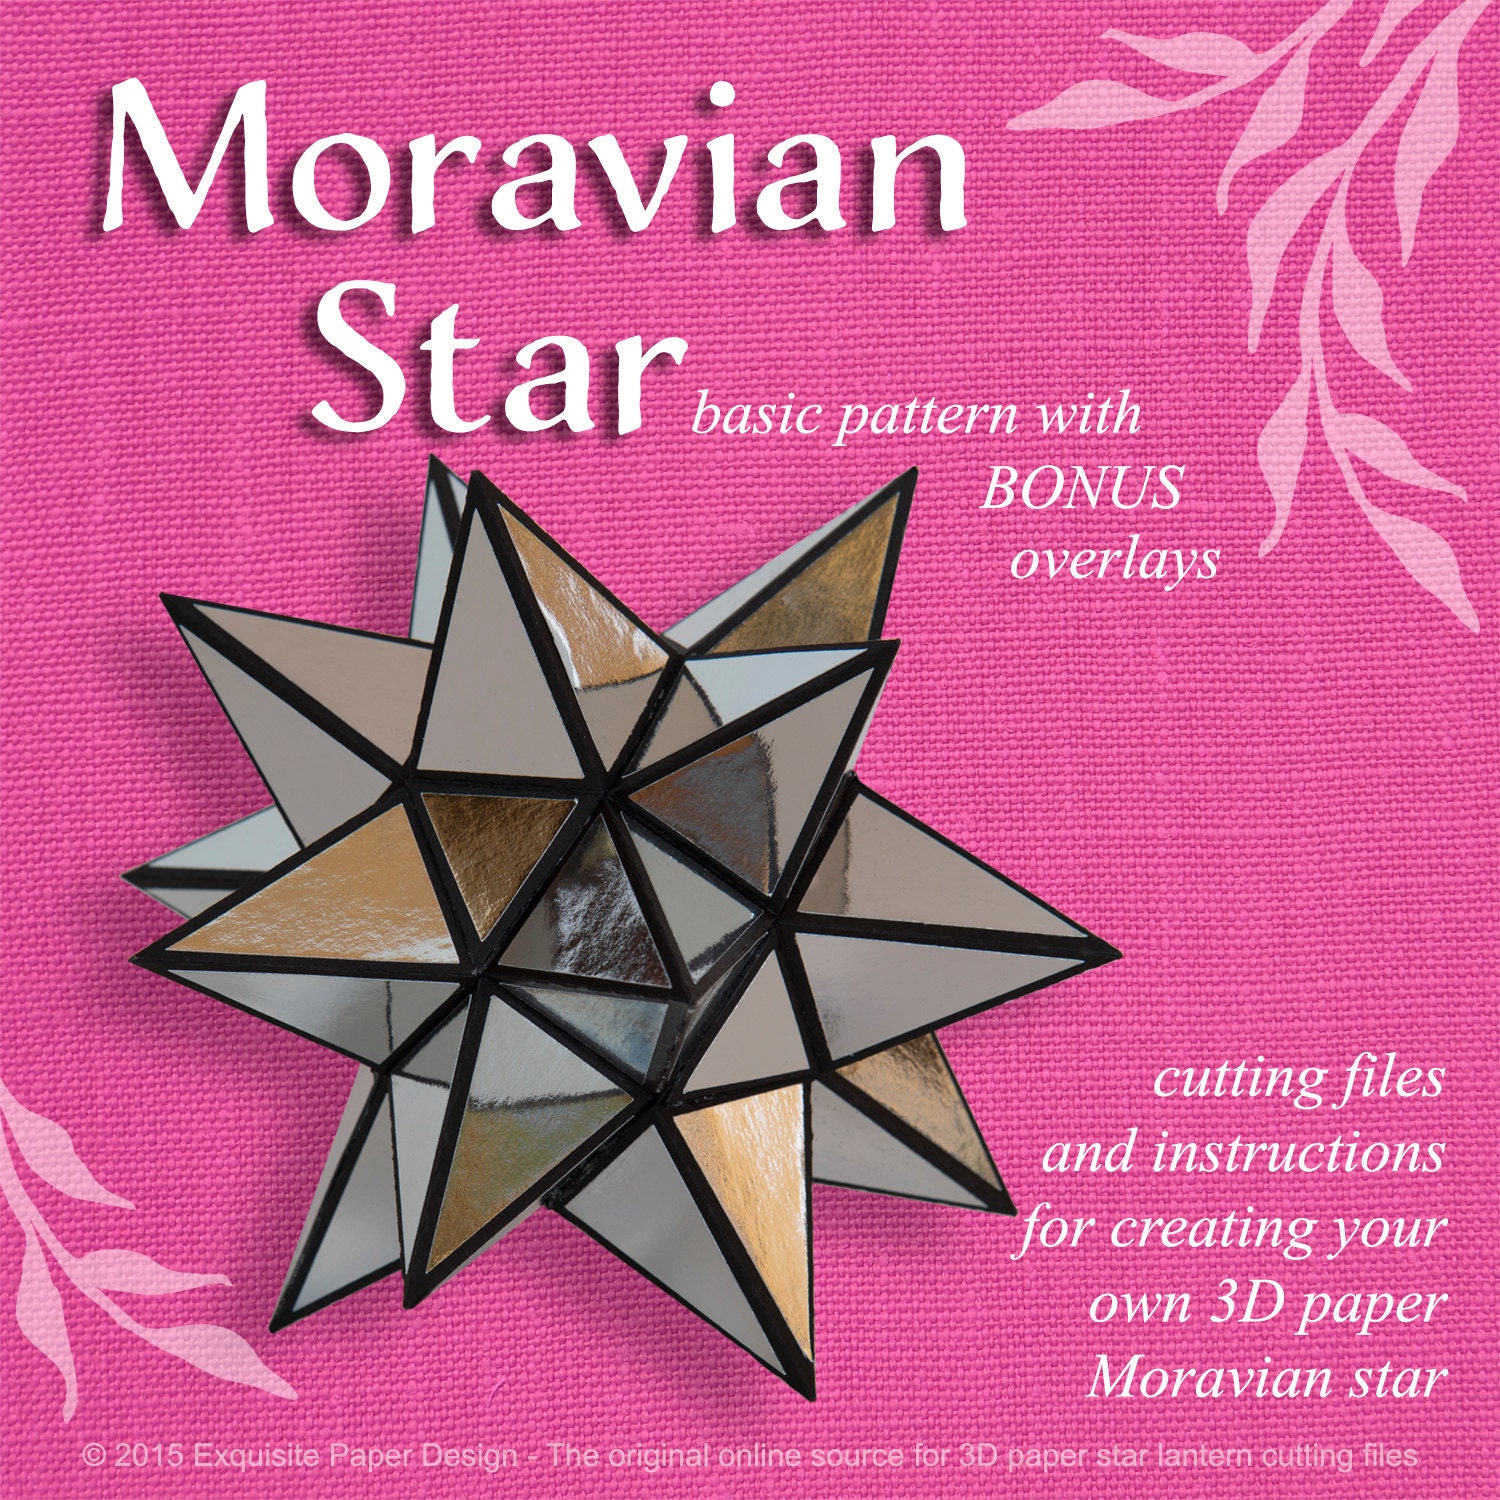 How to Make Paper Moravian Stars Book and 6 Star Kits Ready to Cut and Assemble